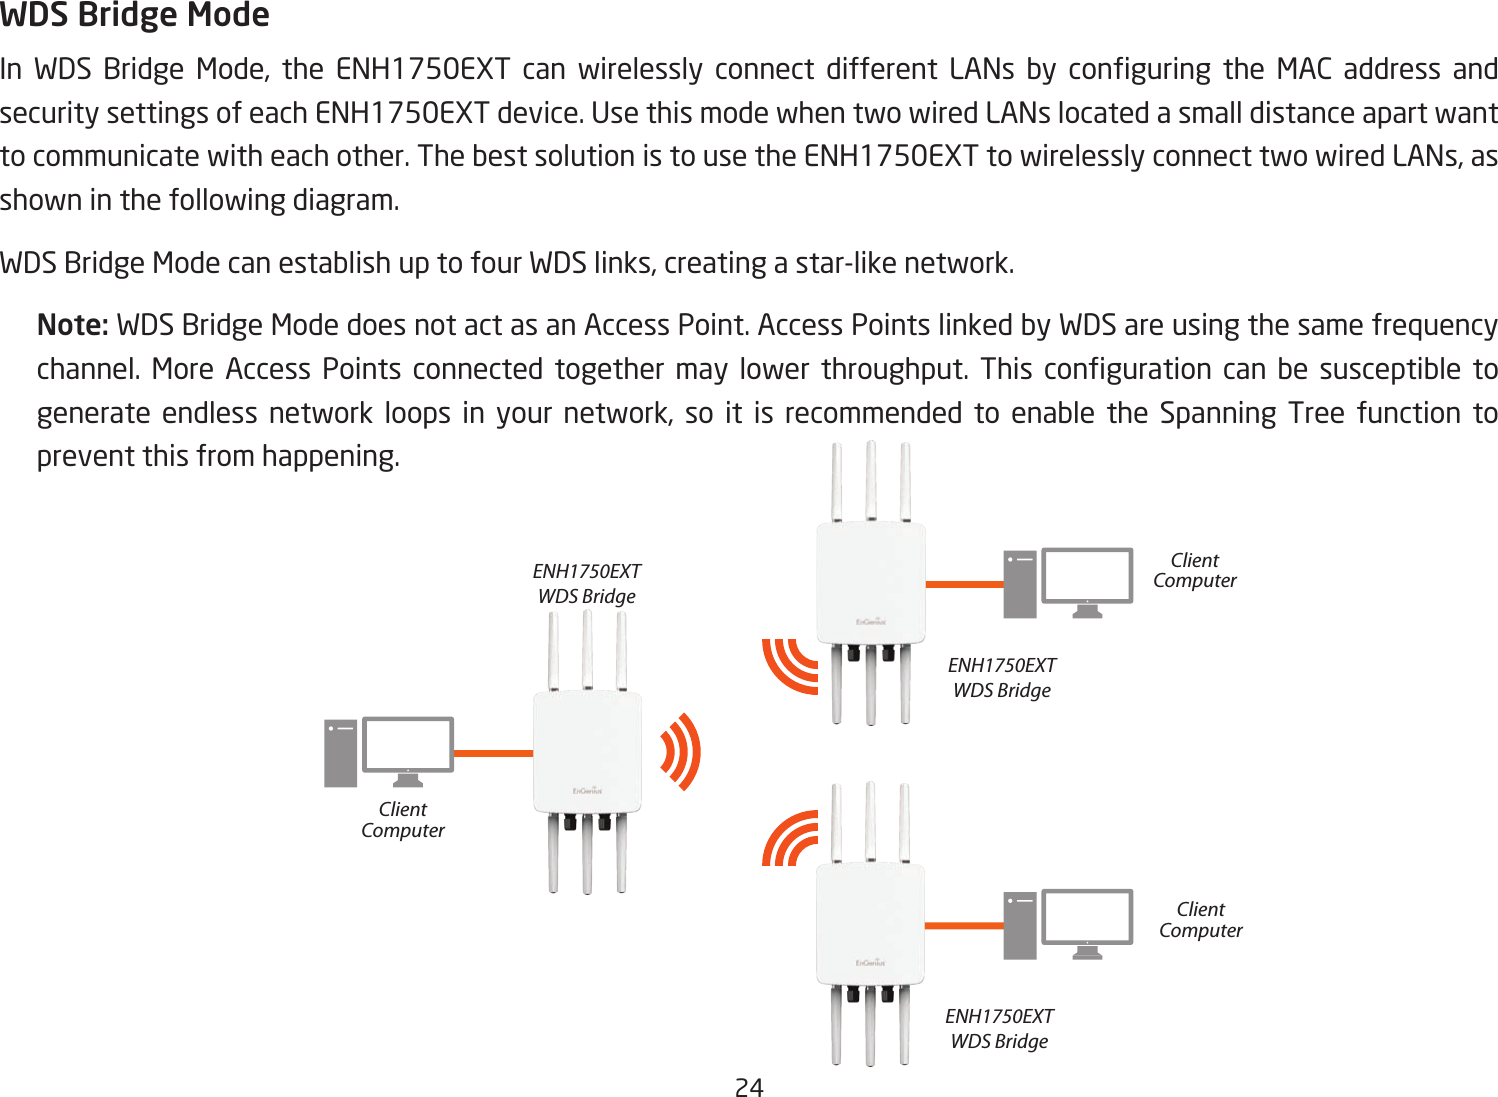 24WDS Bridge ModeIn WDS Bridge Mode, the ENH1750EXT can wirelessly connect different LANs by conguring the MAC address andsecuritysettingsofeachENH1750EXTdevice.UsethismodewhentwowiredLANslocatedasmalldistanceapartwantto communicate with each other. The best solution is to use the ENH1750EXT to wirelessly connect two wired LANs, as shown in the following diagram. WDS Bridge Mode can establish up to four WDS links, creating a star-like network. Note: WDS Bridge Mode does not act as an Access Point. Access Points linked by WDS are using the same frequency channel. More Access Points connected together may lower throughput. This conguration can be susceptible togenerate endless network loops in your network, so it is recommended to enable the Spanning Tree function to prevent this from happening.ENH1750EXTWDS BridgeENH1750EXTWDS BridgeENH1750EXTWDS BridgeClientComputerClientComputerClientComputer